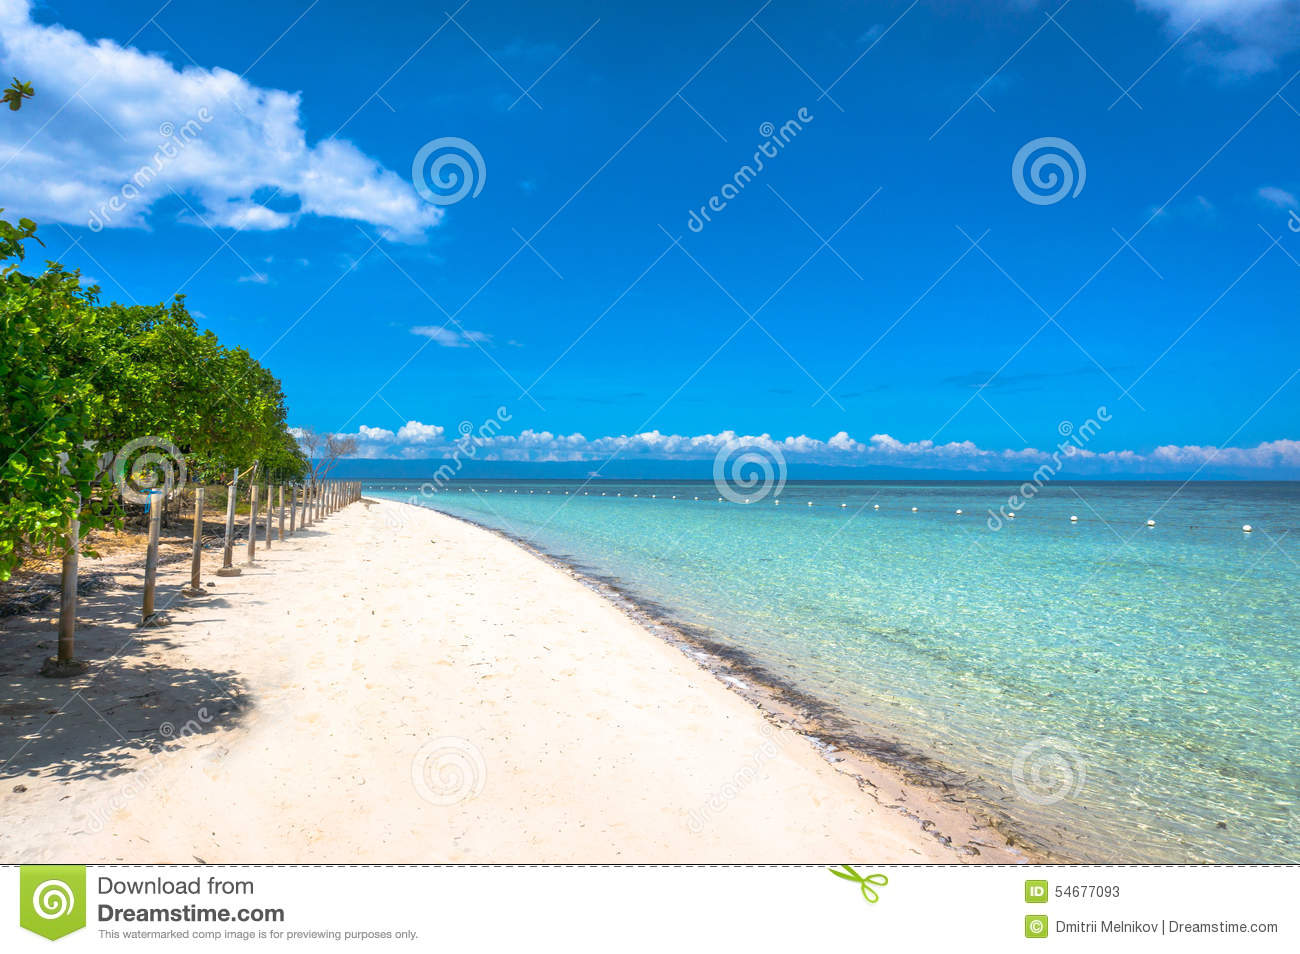 The Beach In The Philippine Islands On The Background Of Blue Sky And